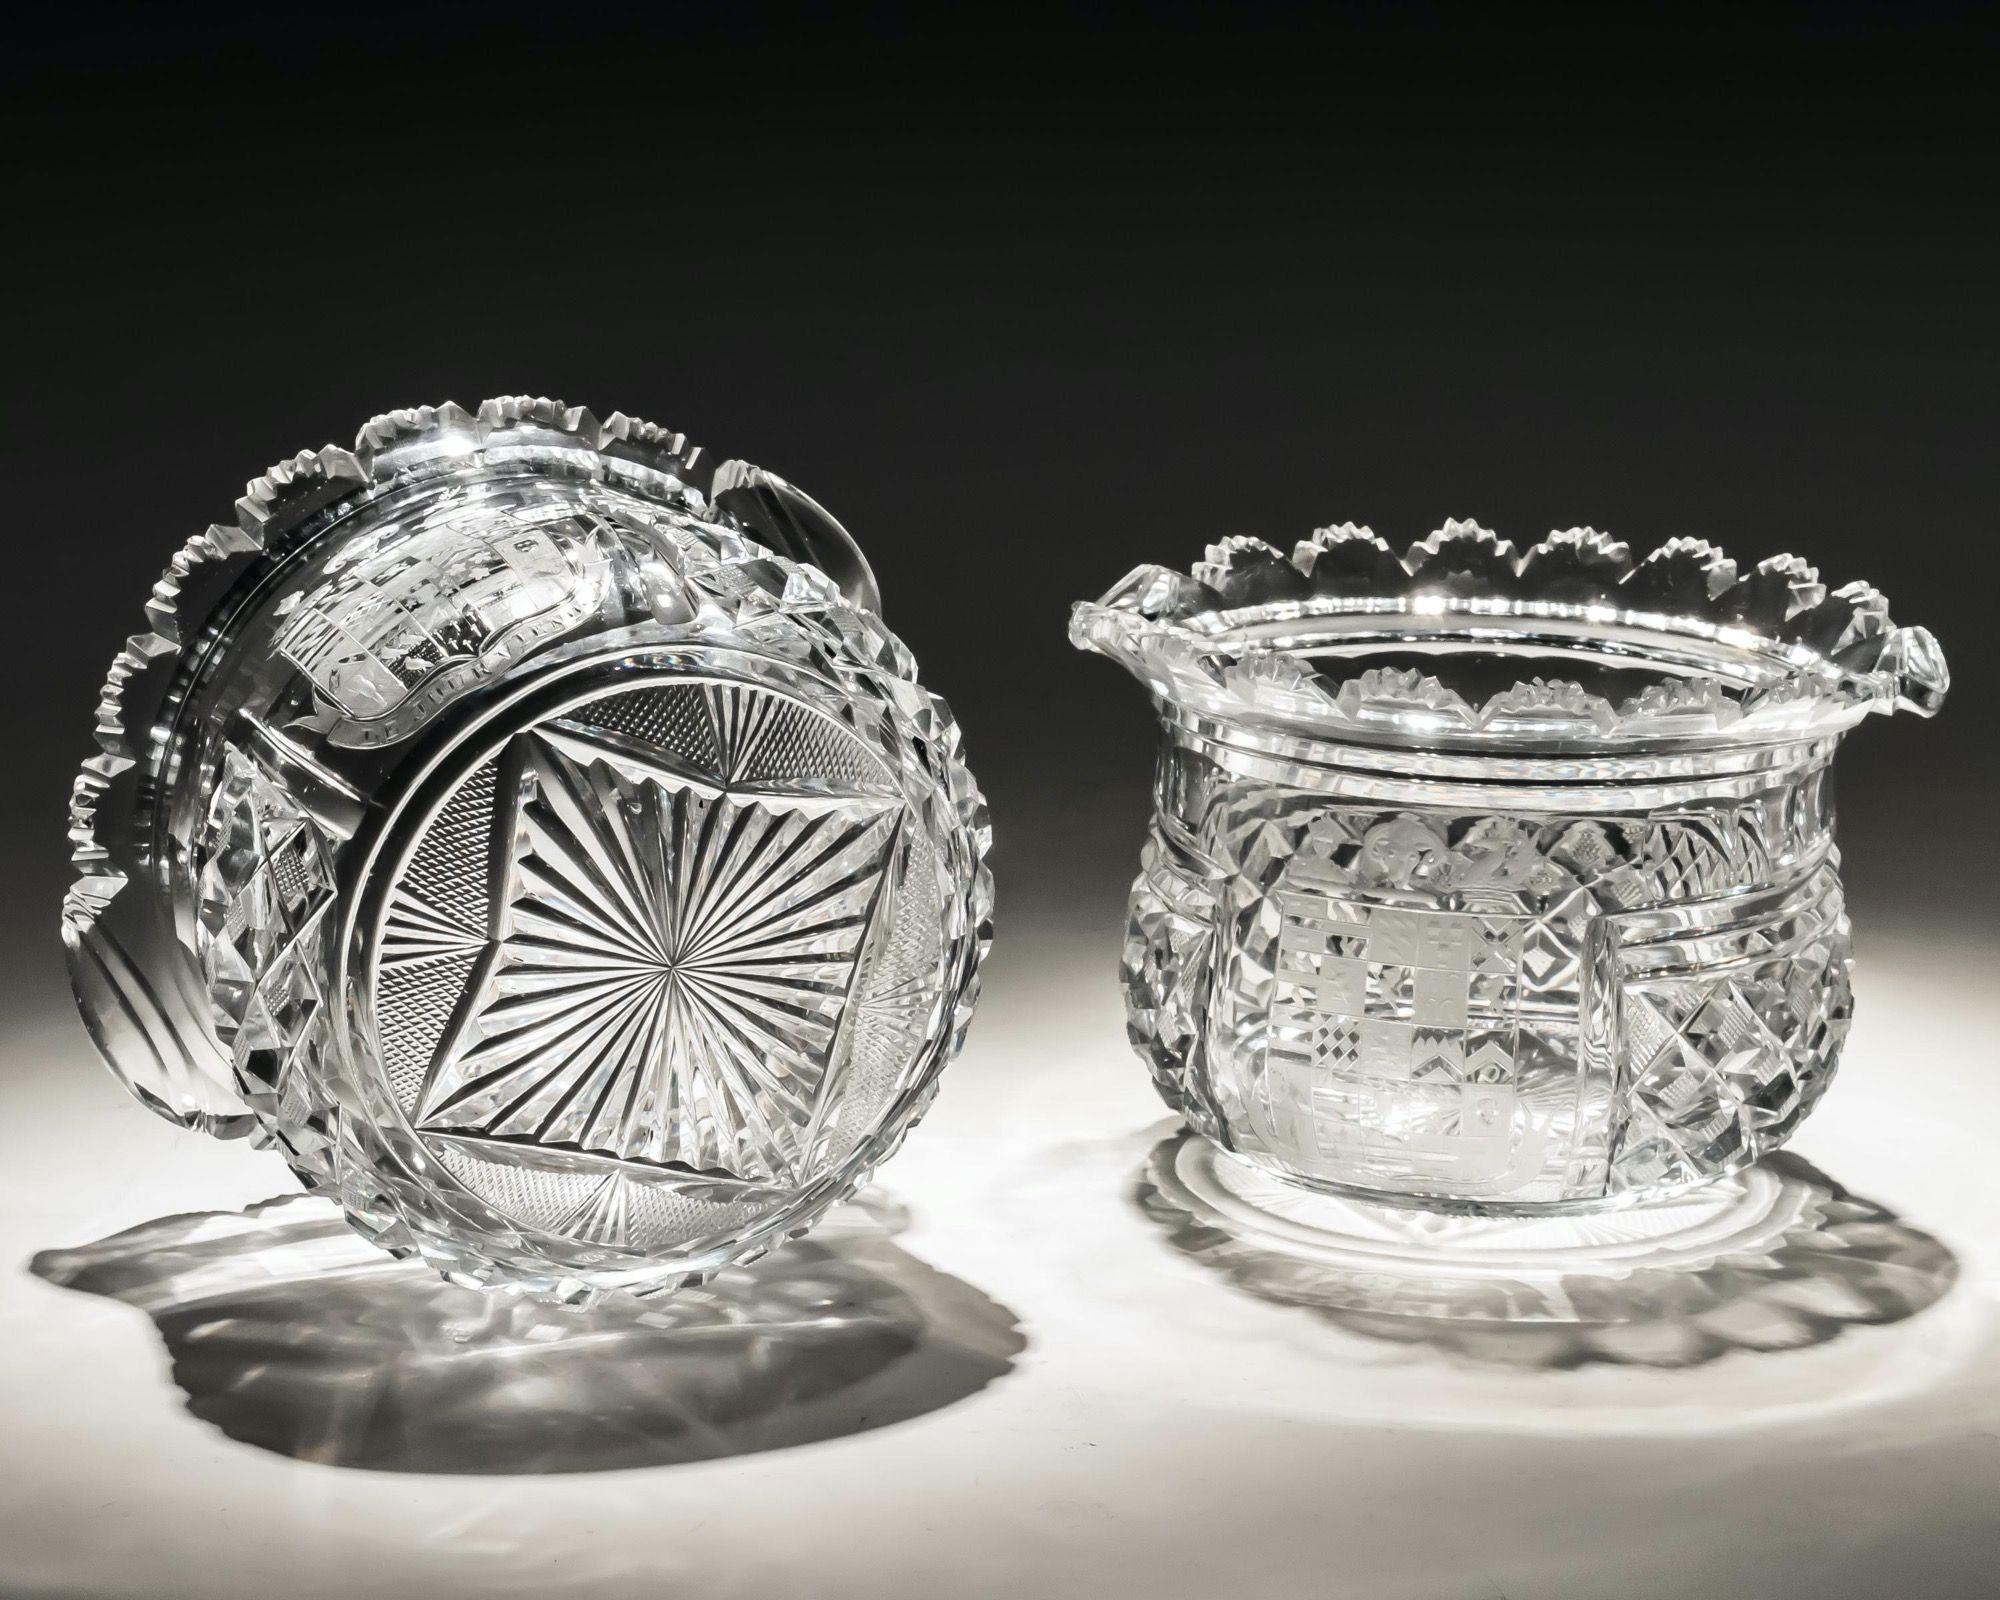 This exceptional suite of Regency cut glass, consisting of pairs of elaborately cut decanters, bucket bowl goblets and wine rinsers. All are finely engraved to the front panel with the full coat of arms of John George Lambton, with the family motto